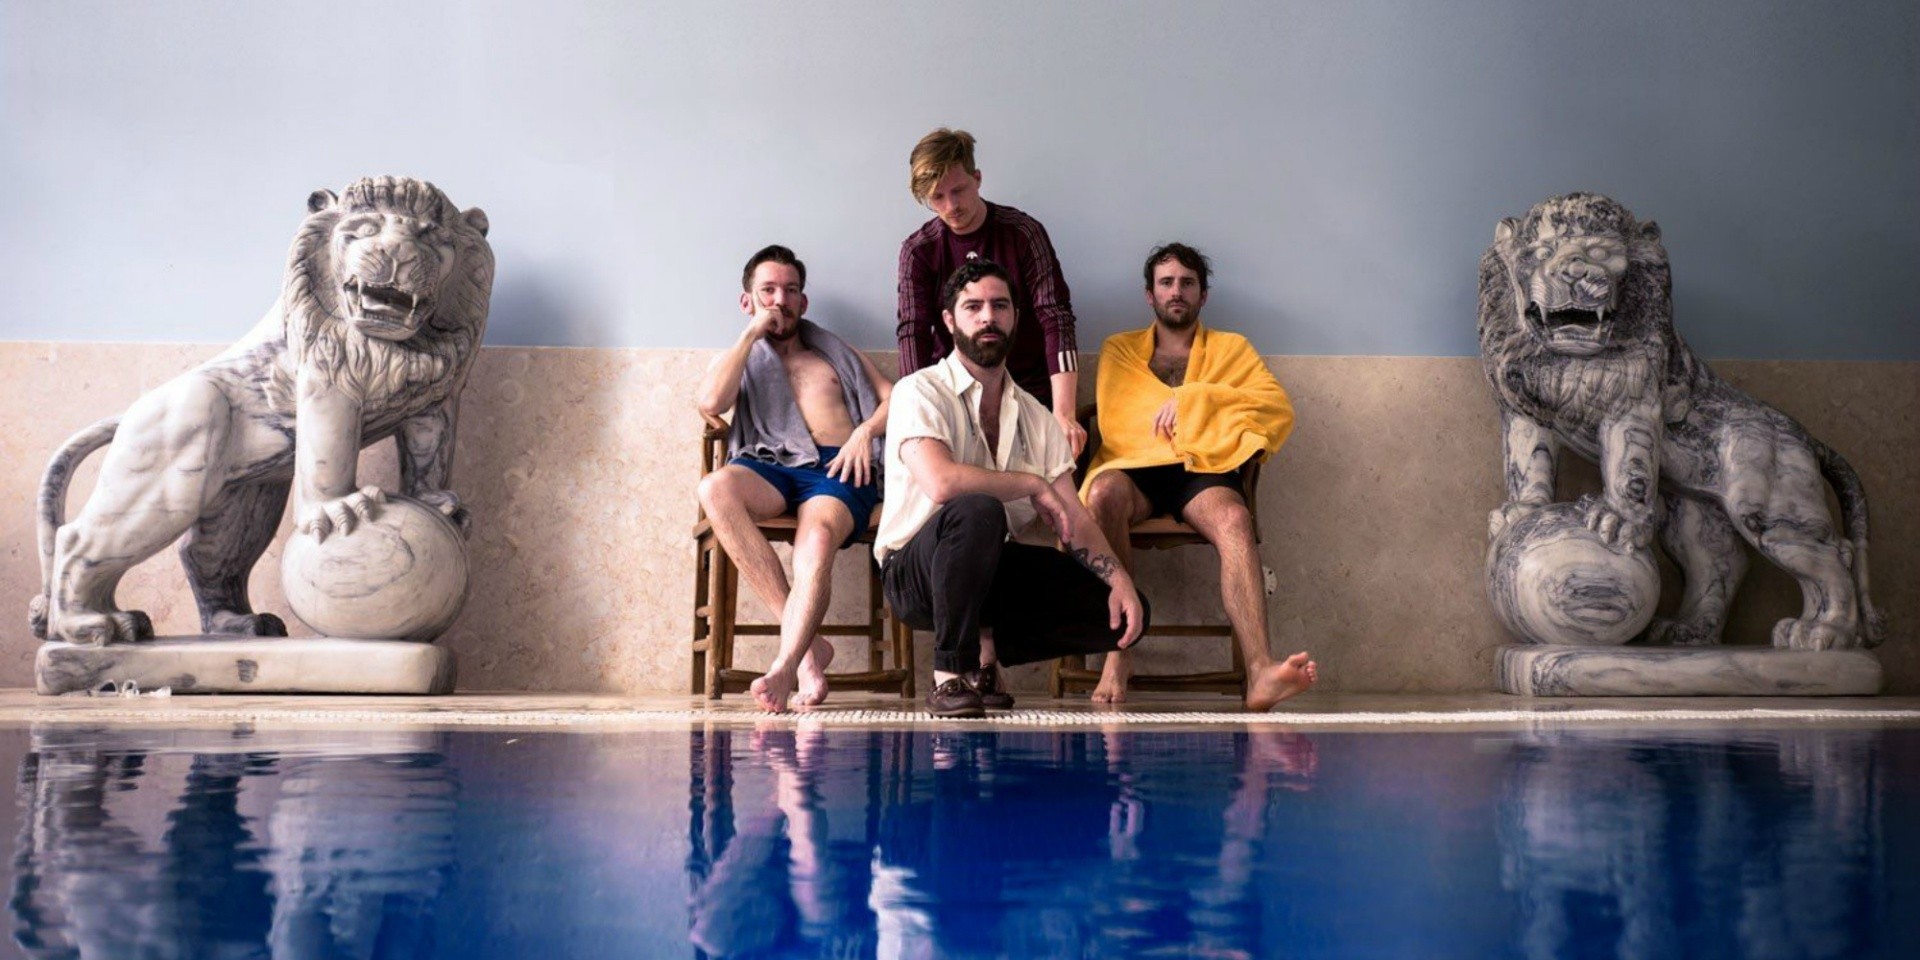 Foals shares vibrant new single 'On The Luna' – listen